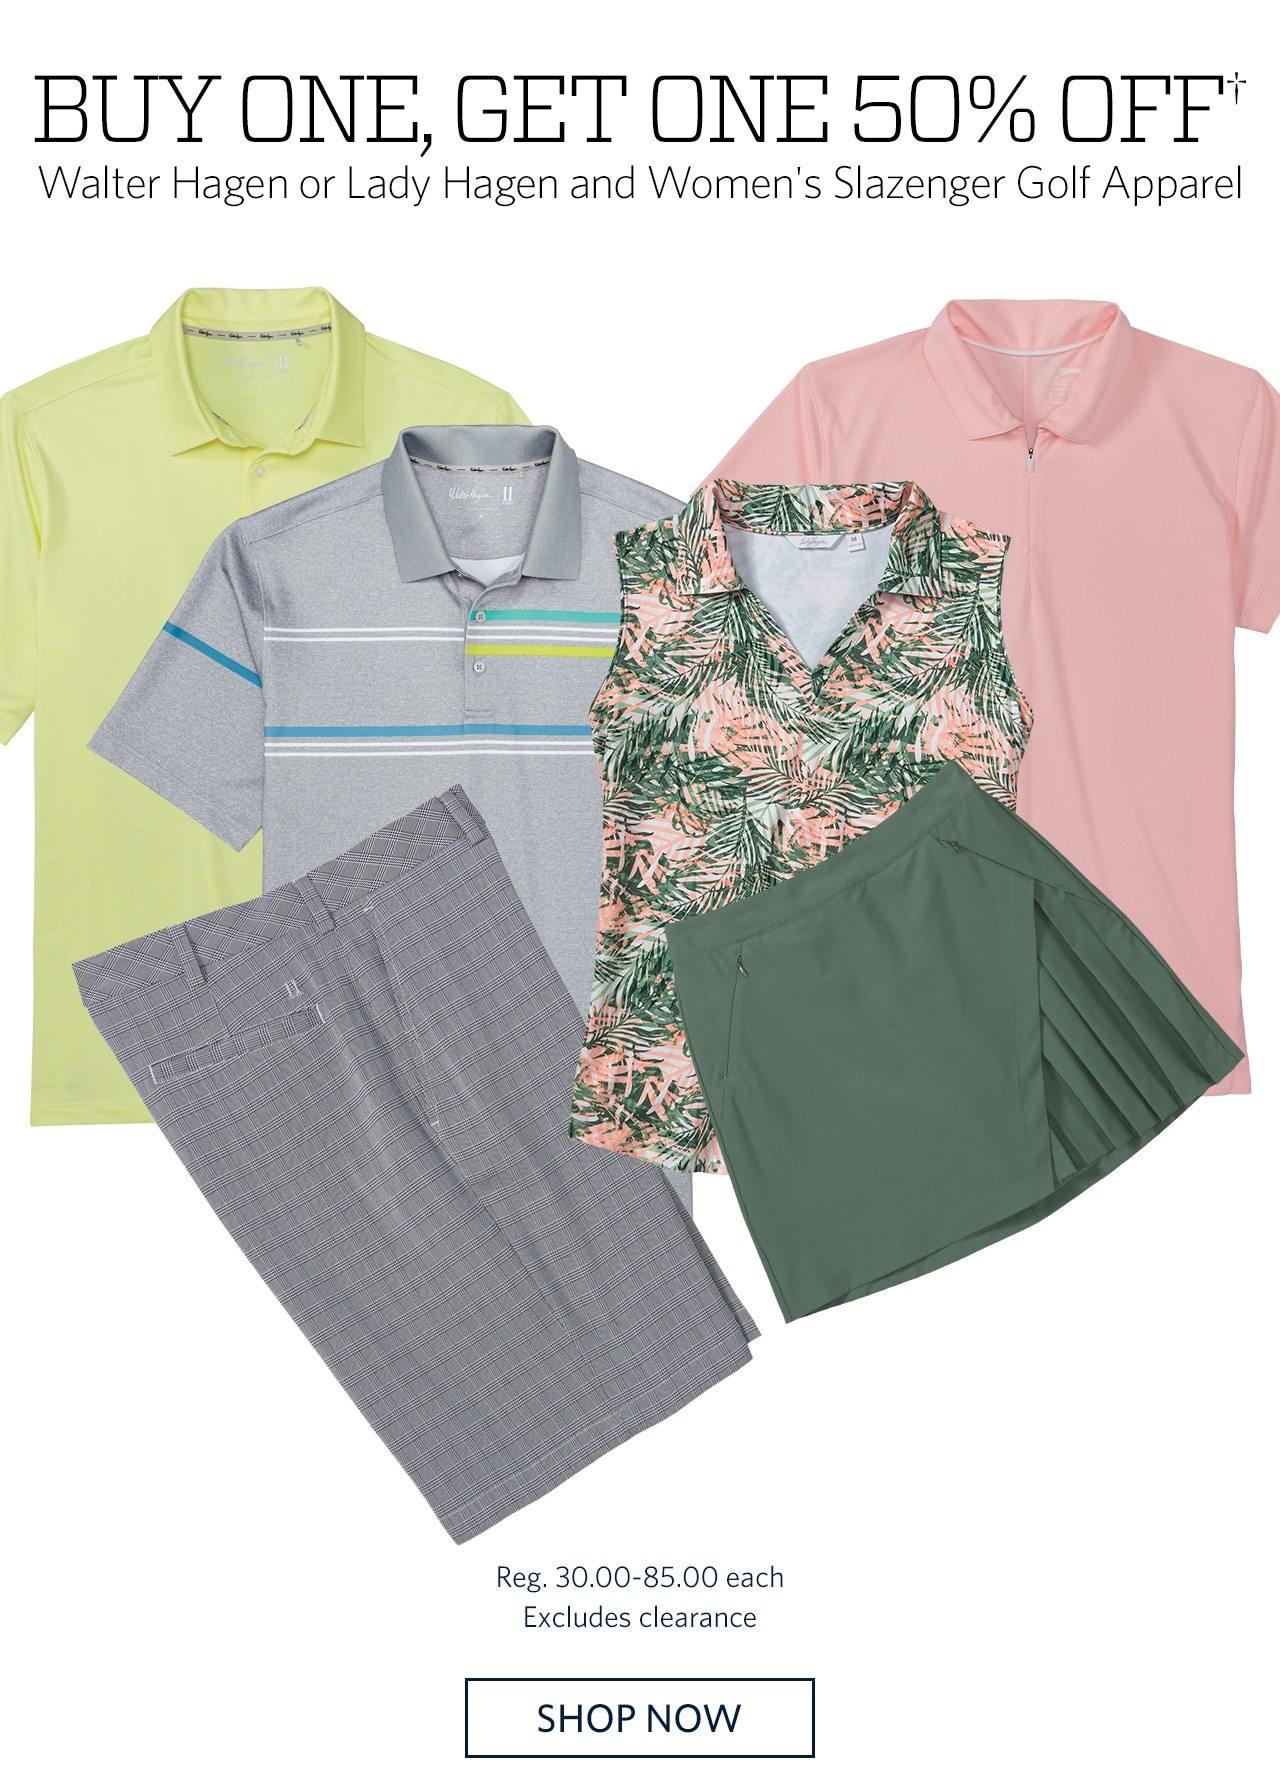 Buy One, Get One 50% Off† Walter Hagen or Lady Hagen and Women's Slazenger Golf Apparel | Reg. 30.00-85.00 each | Excludes clearance | SHOP NOW